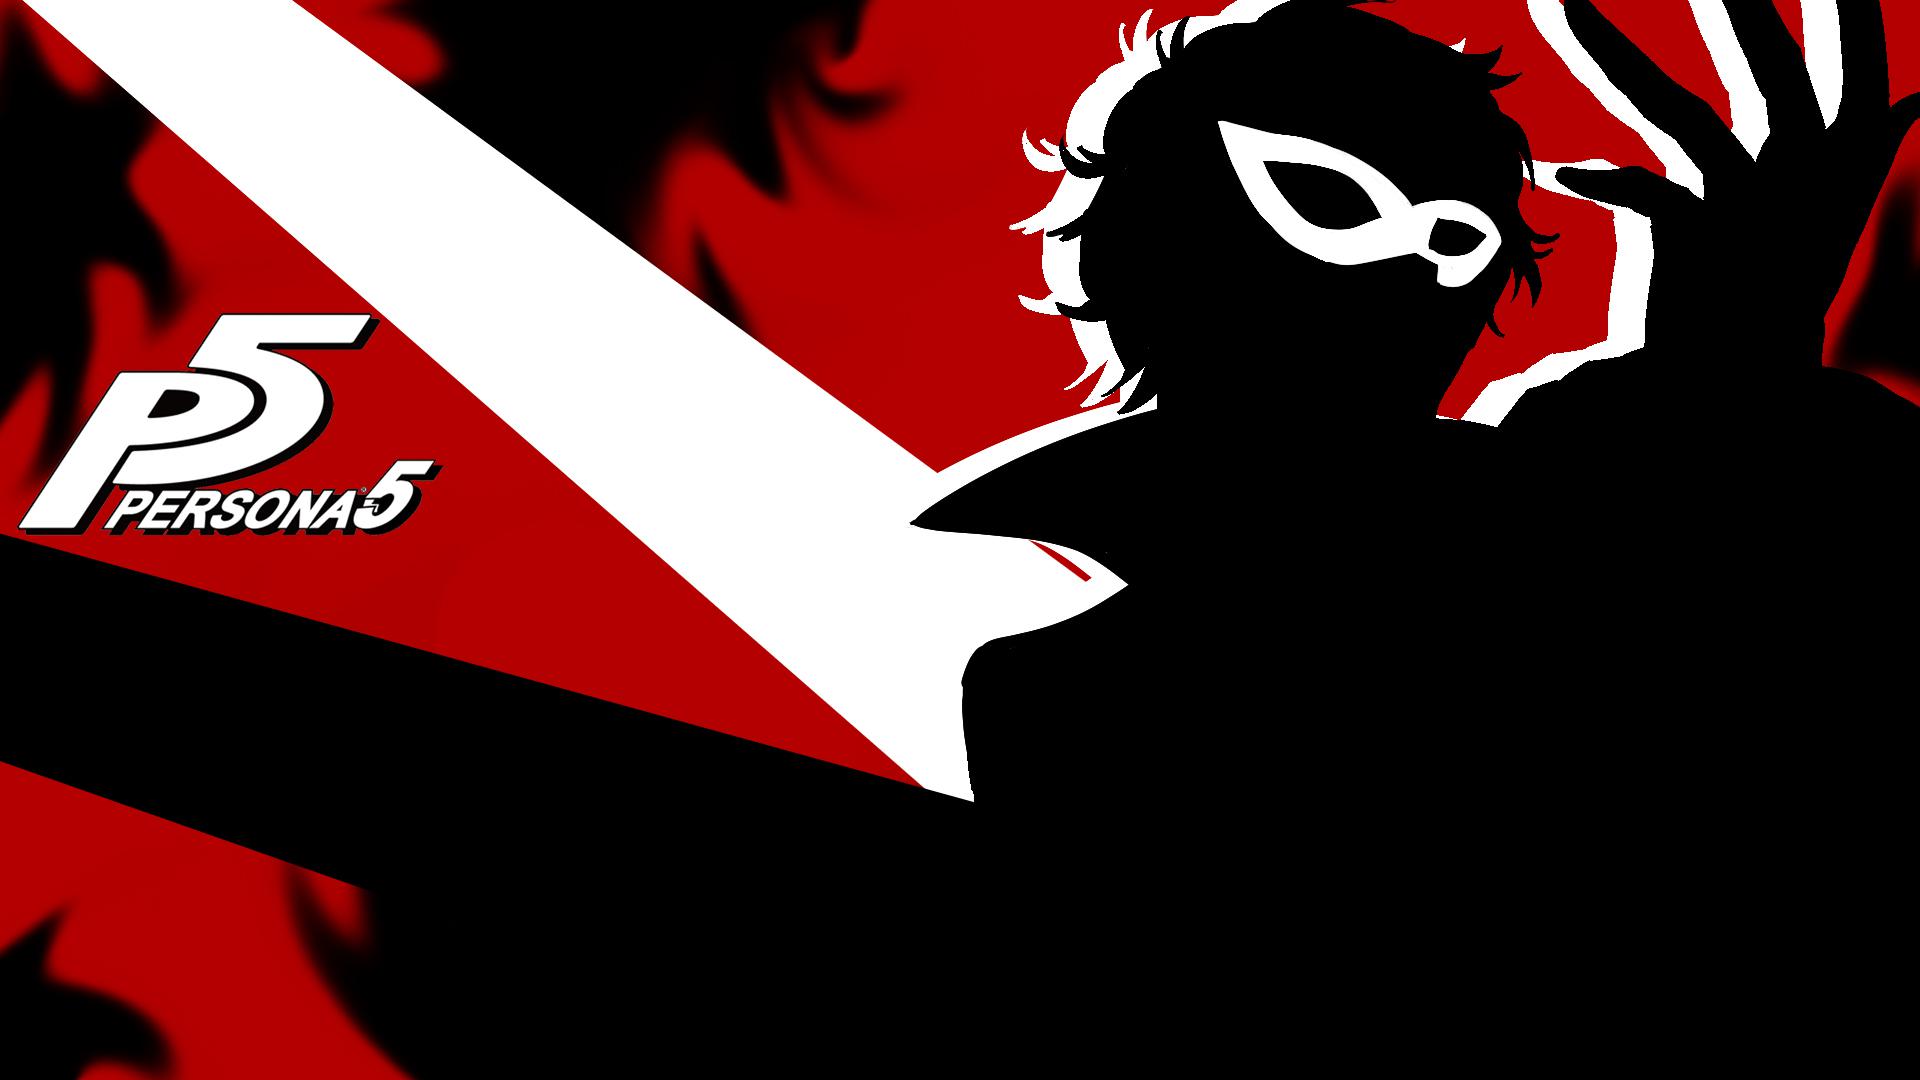 Persona 5 wallpaper I made for my desktop, feel free to use